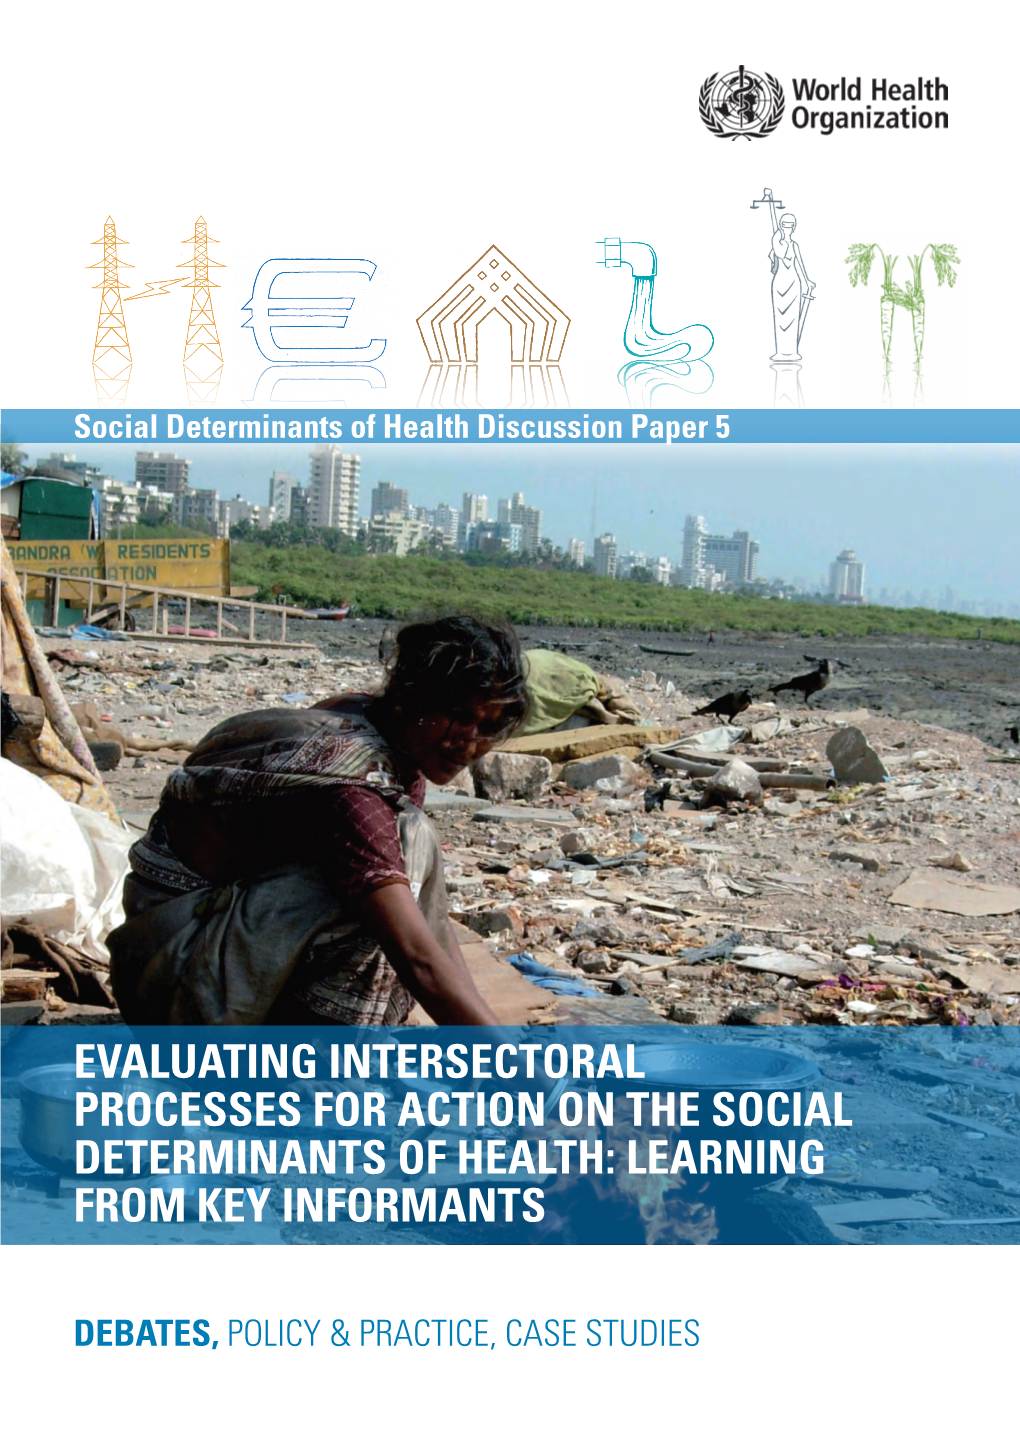 Social Determinants of Health Discussion Paper 5